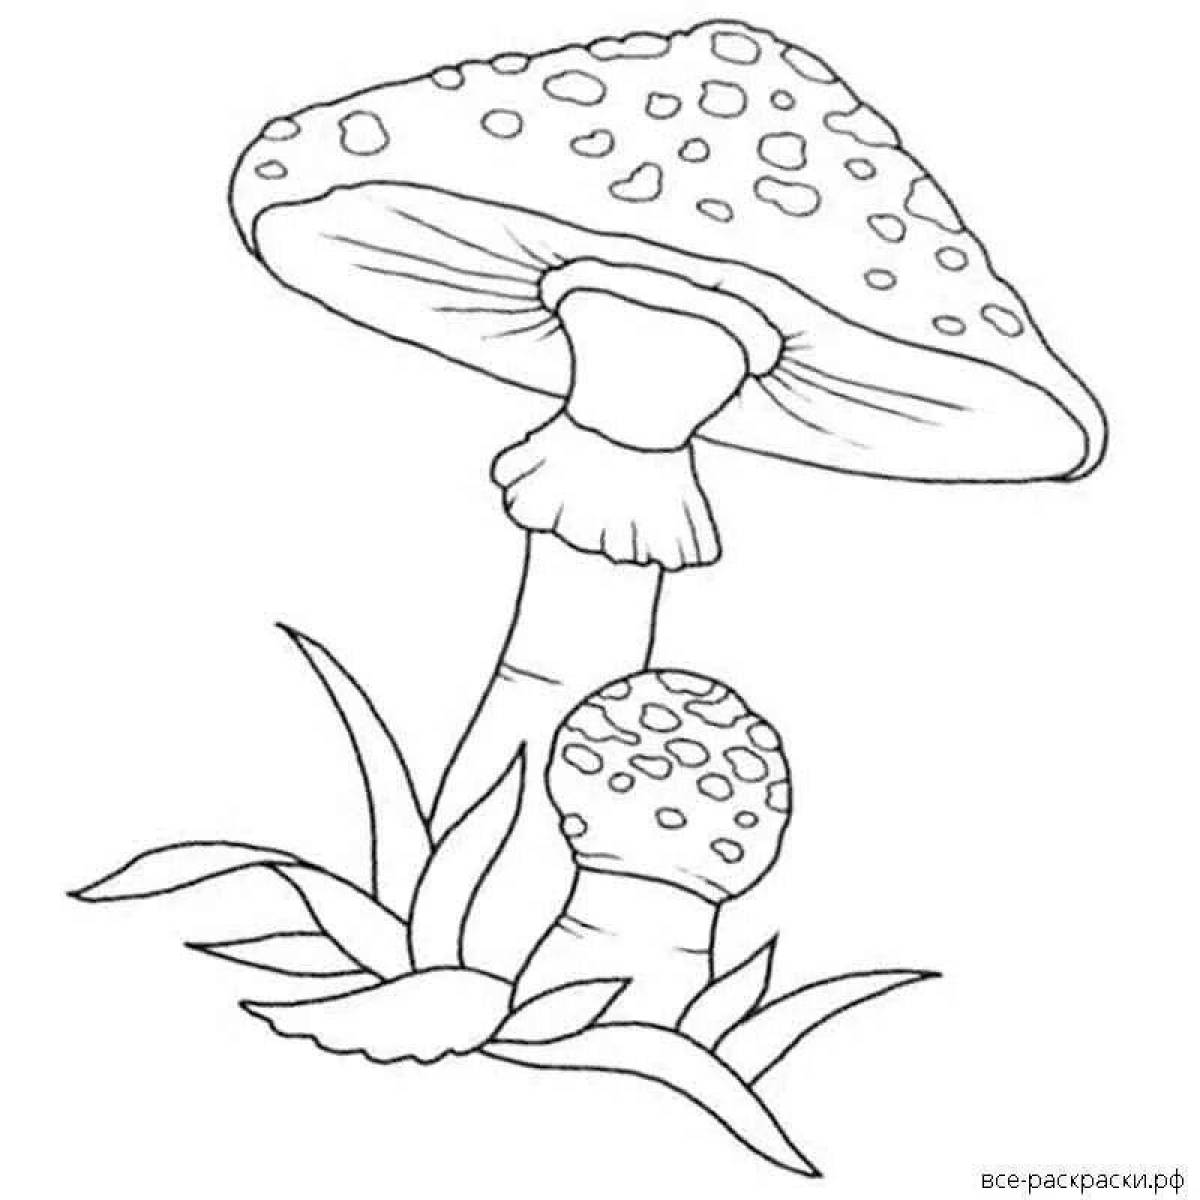 Bright fly agaric coloring page